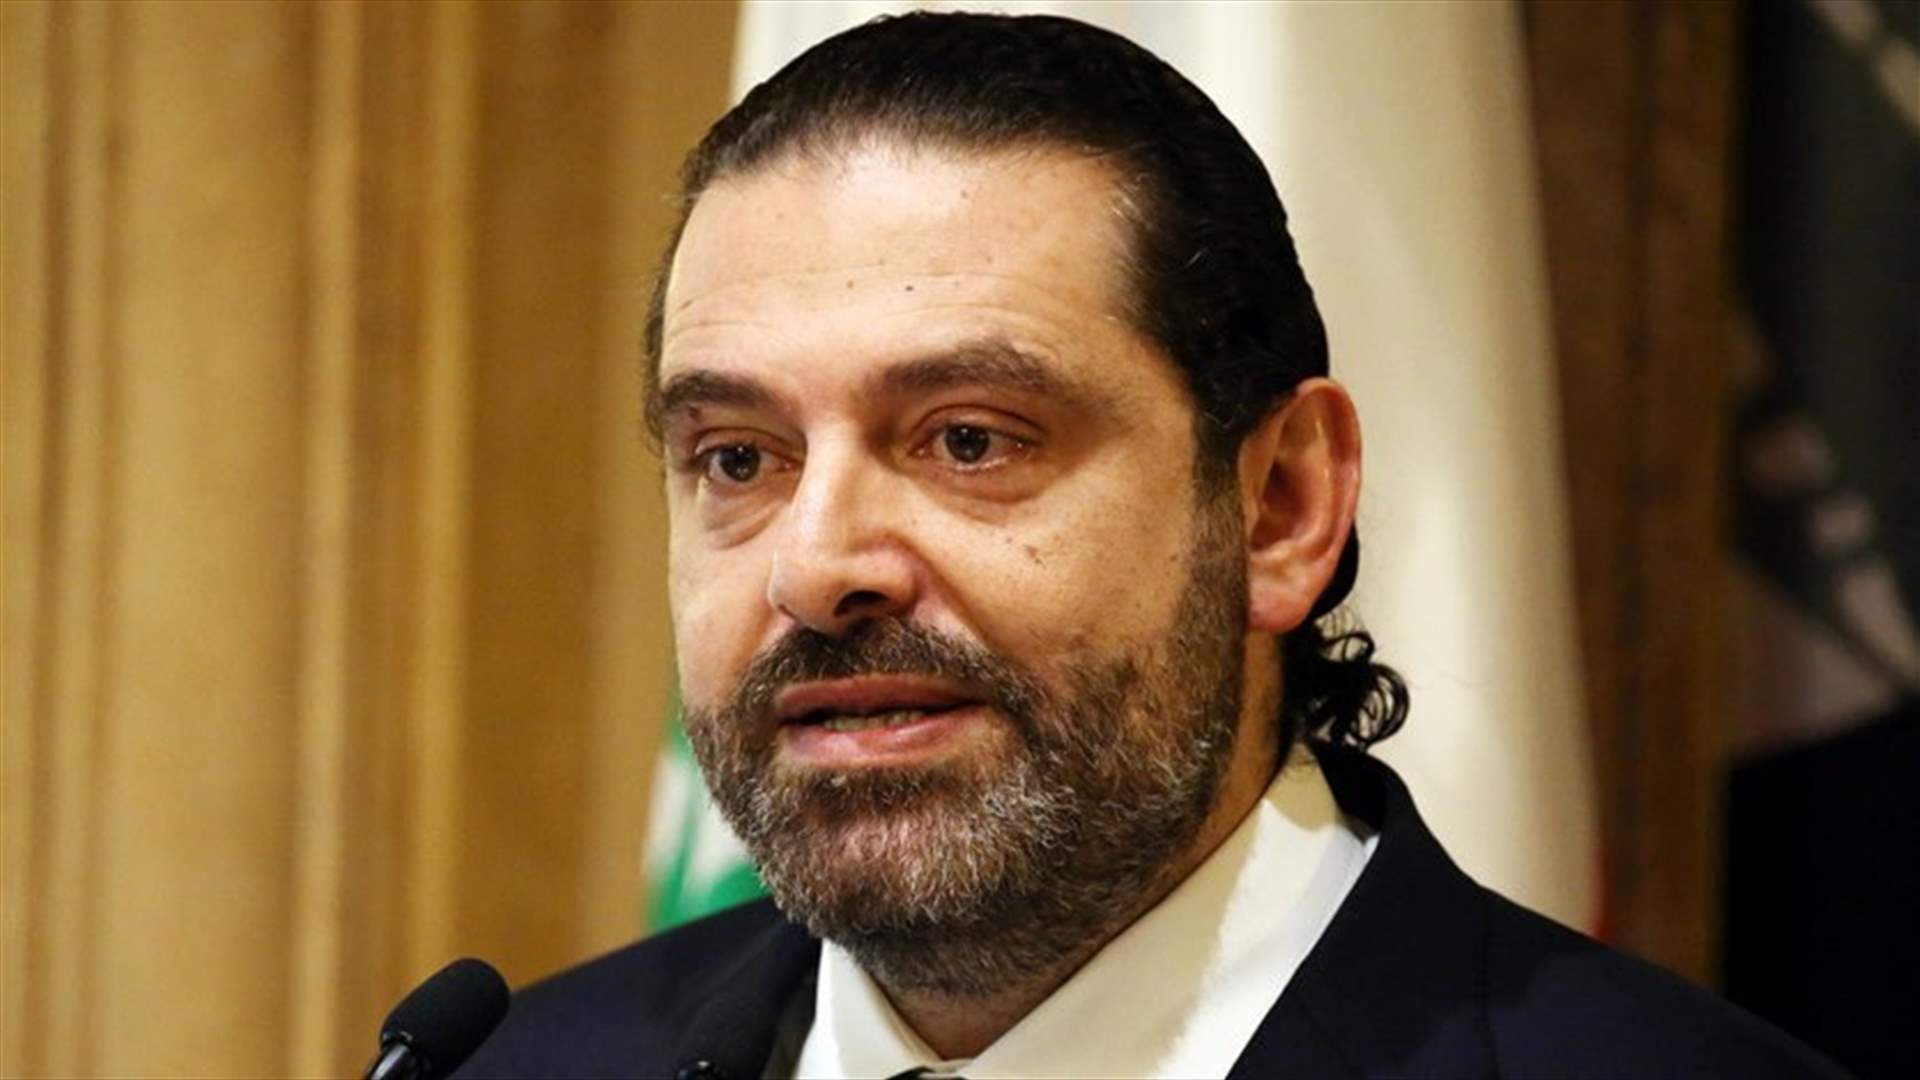 Hariri from London: It is true we don’t have a government but we are committed to CEDRE reforms ​